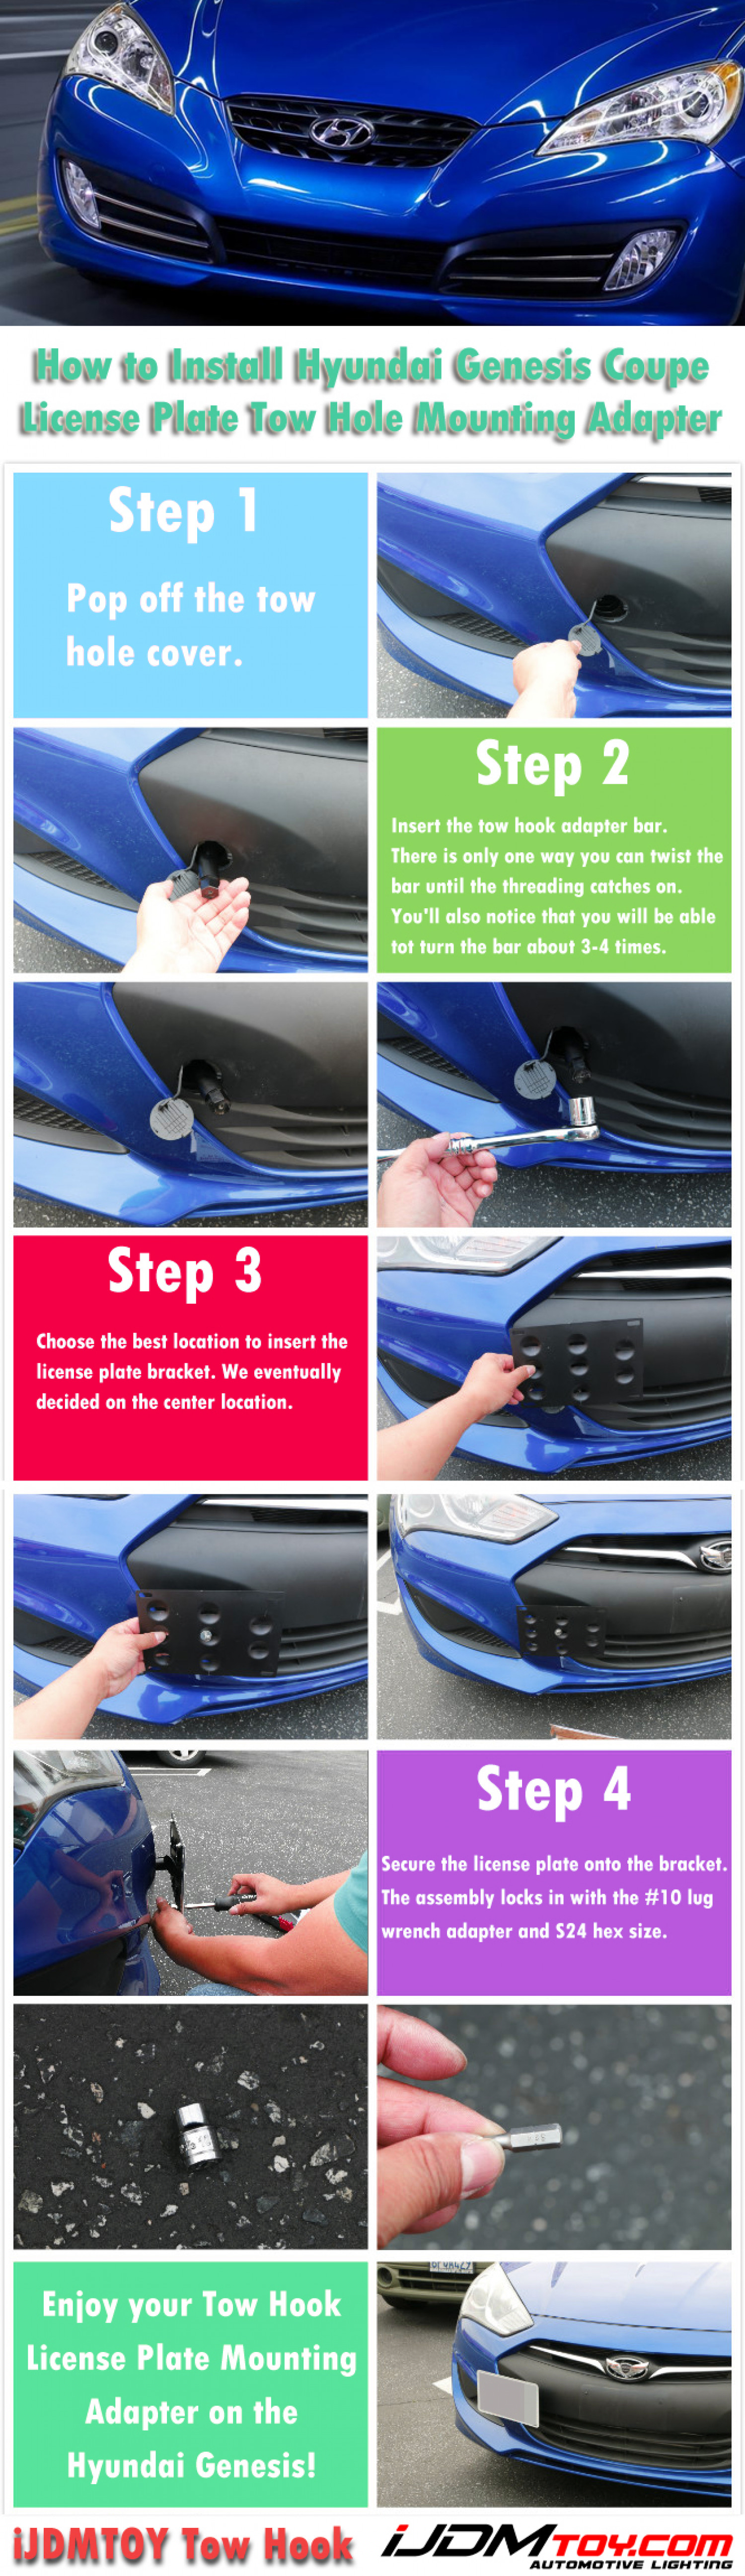 Install Hyundai Genesis Coupe License Plate Tow Hole Mounting Adapter Infographic